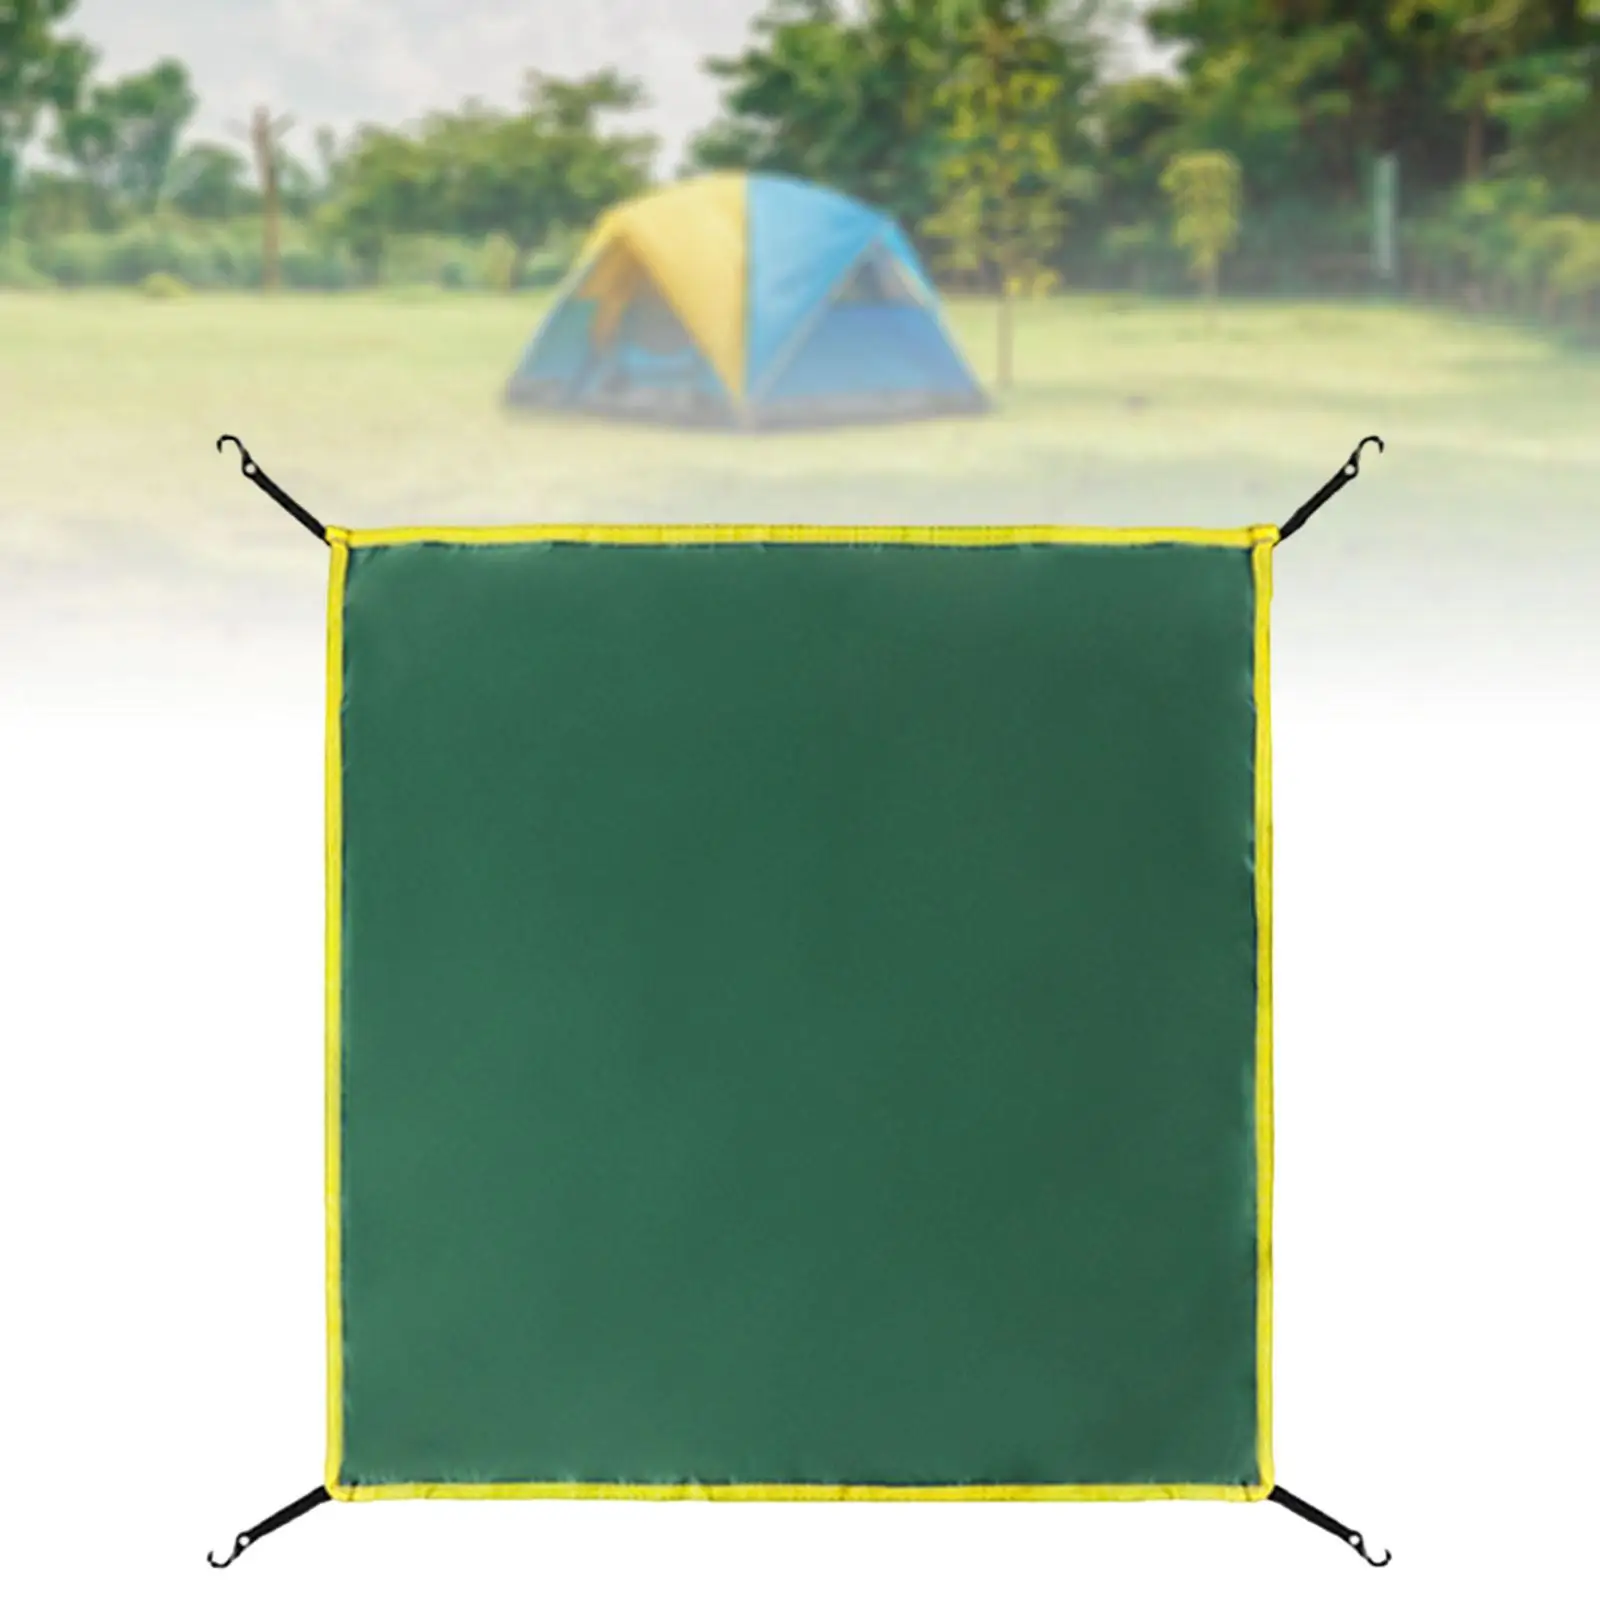 Rainfly Tent Top Cover, Rain Fly Fits 3-4 Persons, Instant Tent, Top Tarp for